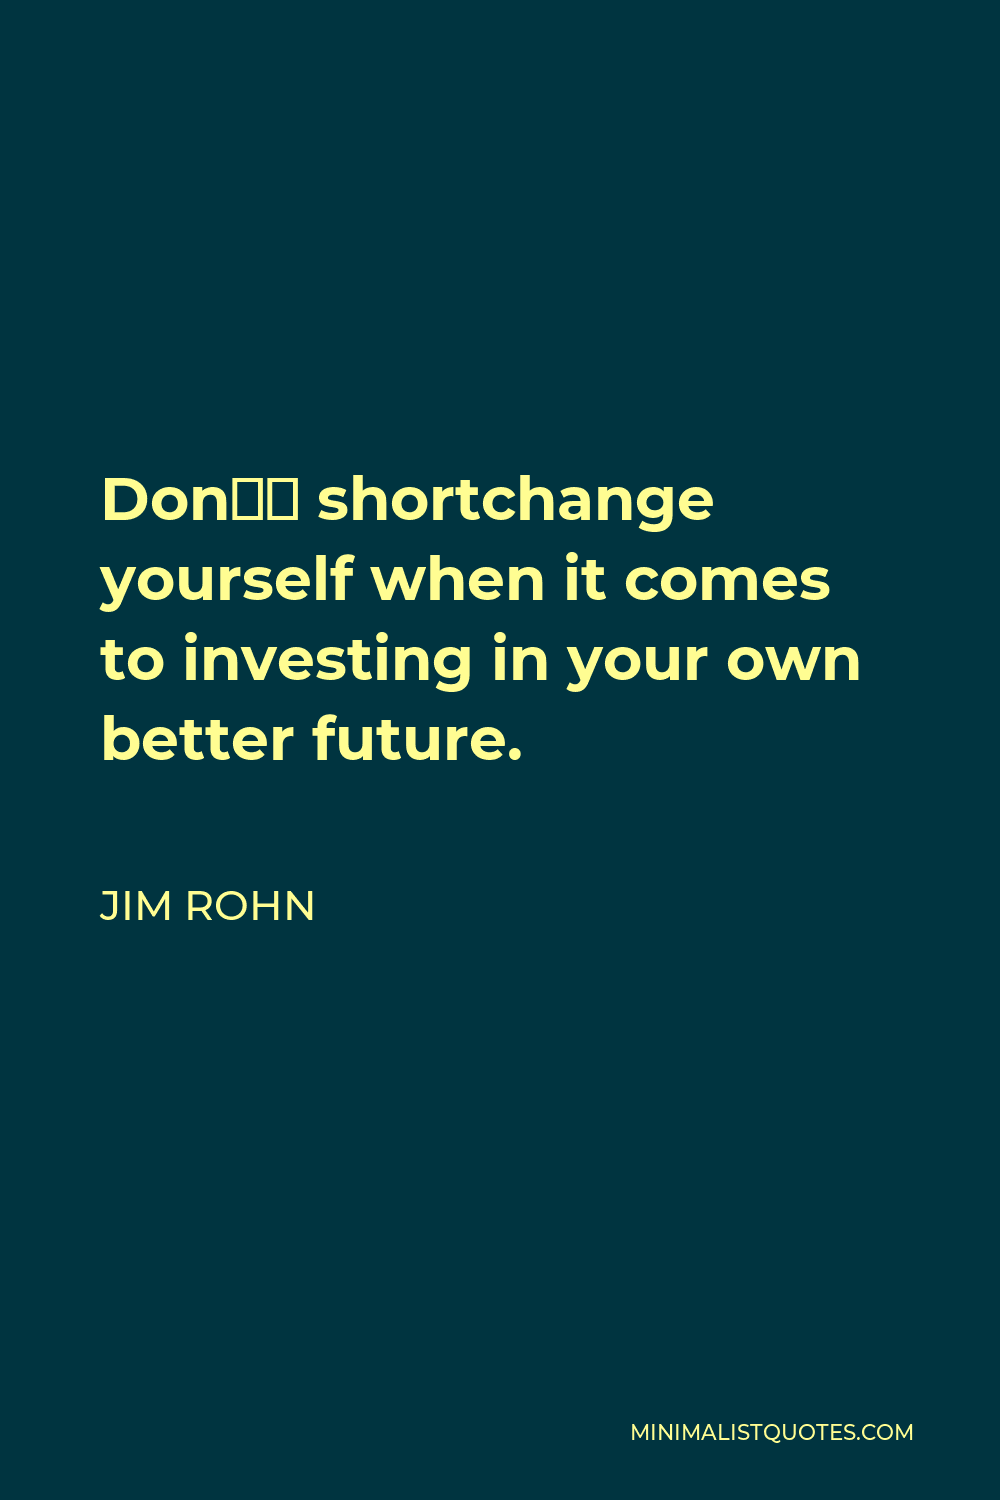 Jim Rohn Quote - Don’t shortchange yourself when it comes to investing in your own better future.